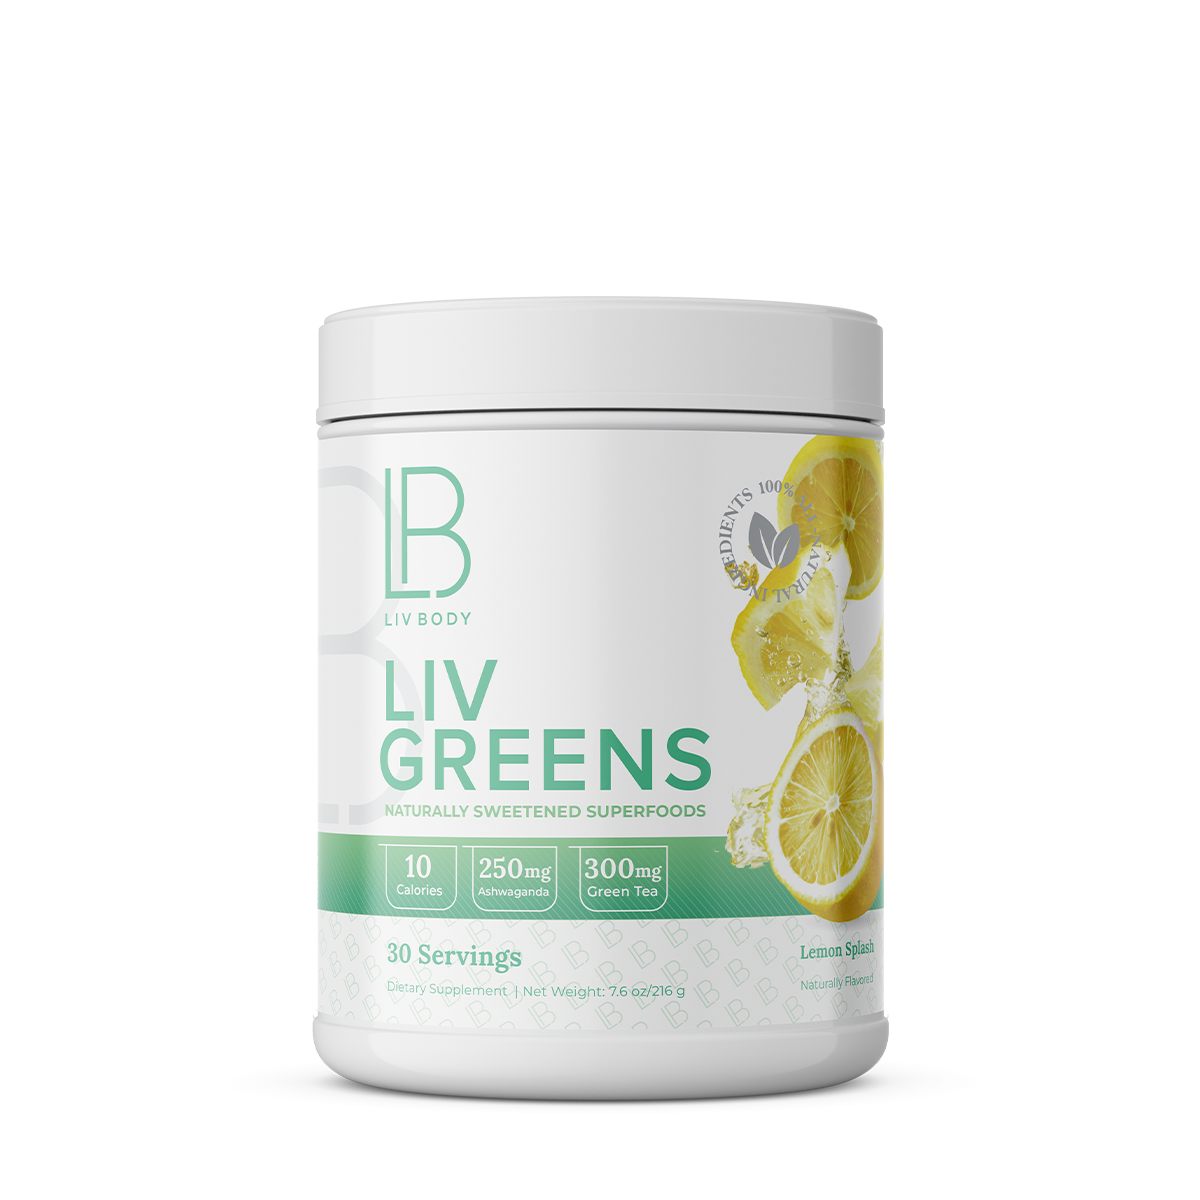 Image of LIV Greens - Superfoods for better exercise performance and improved post-workout recovery.